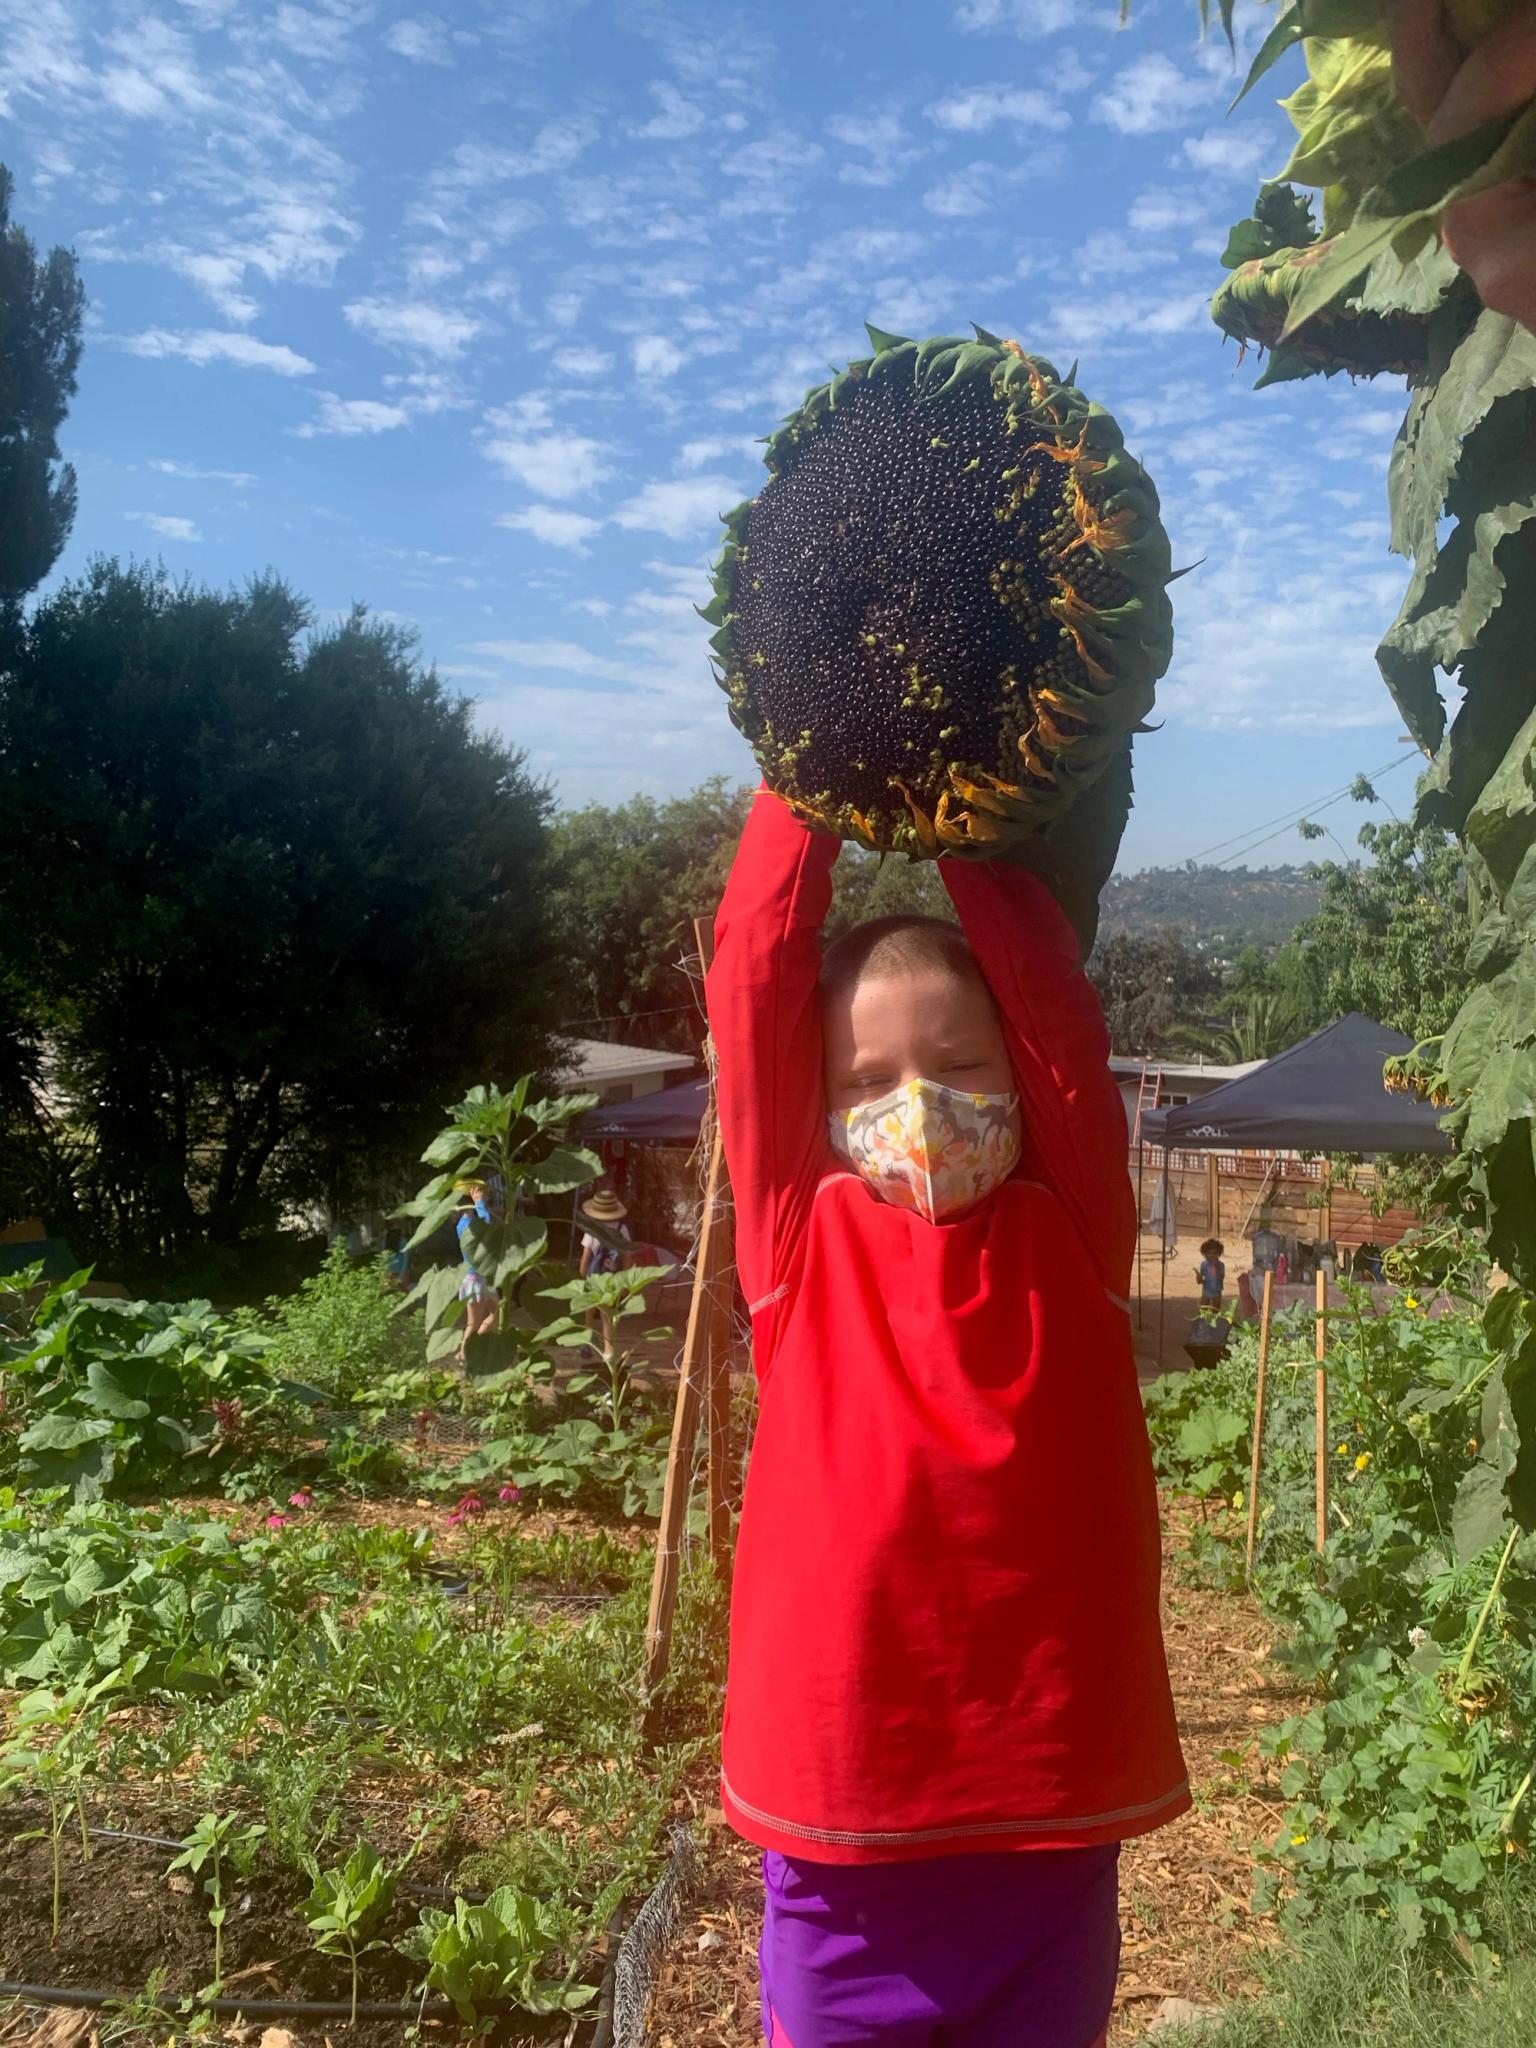 child wearing a red shirt and mask holds a large sunflower head full of seeds over their head